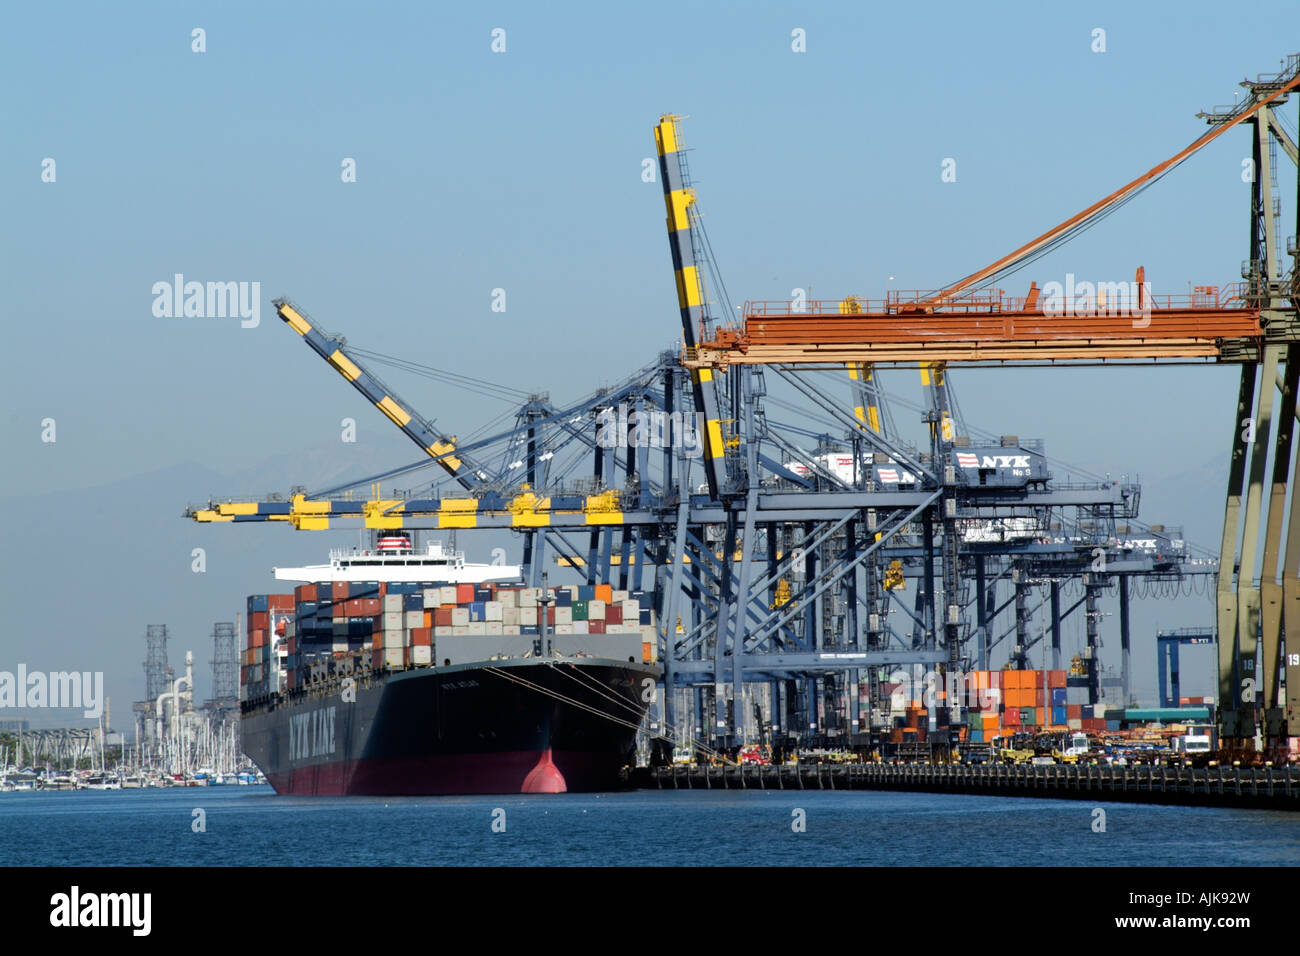 NYK Container Terminal Port of Los Angeles California USA Alongside loading is the NYK Atlas container ship Stock Photo